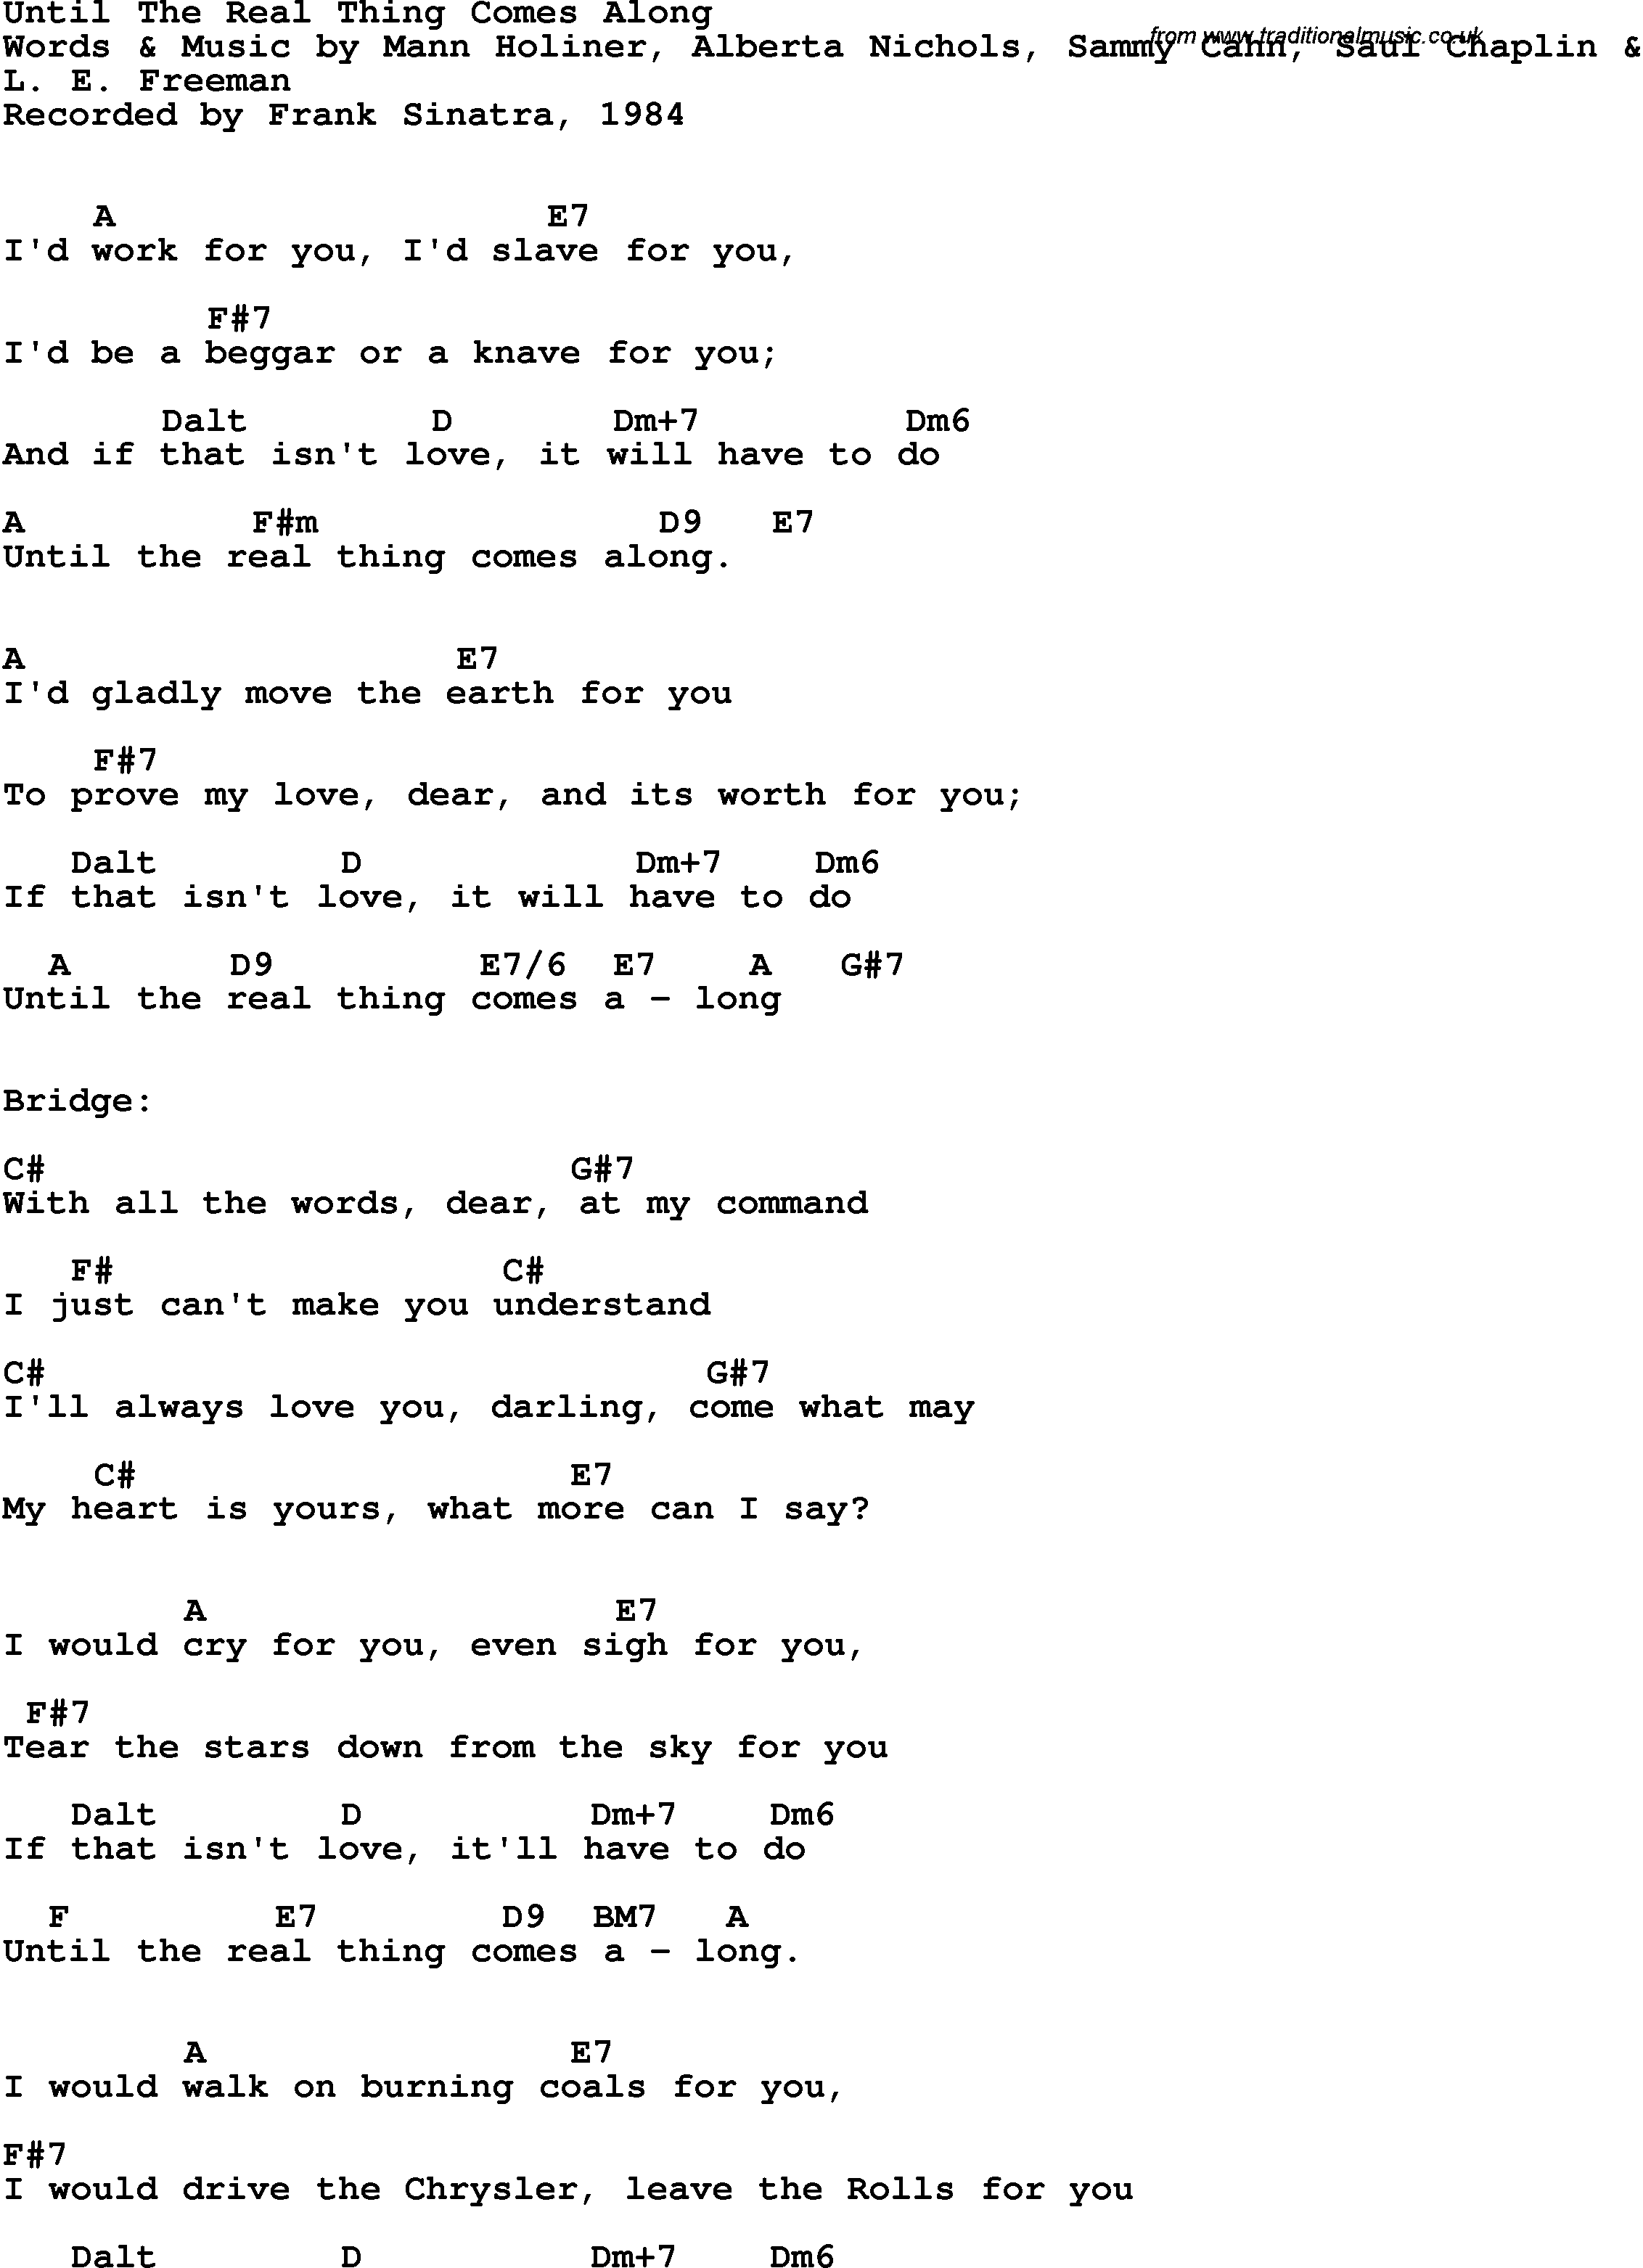 Song Lyrics with guitar chords for Until The Real Thing Comes Along - Frank Sinatra, 1984